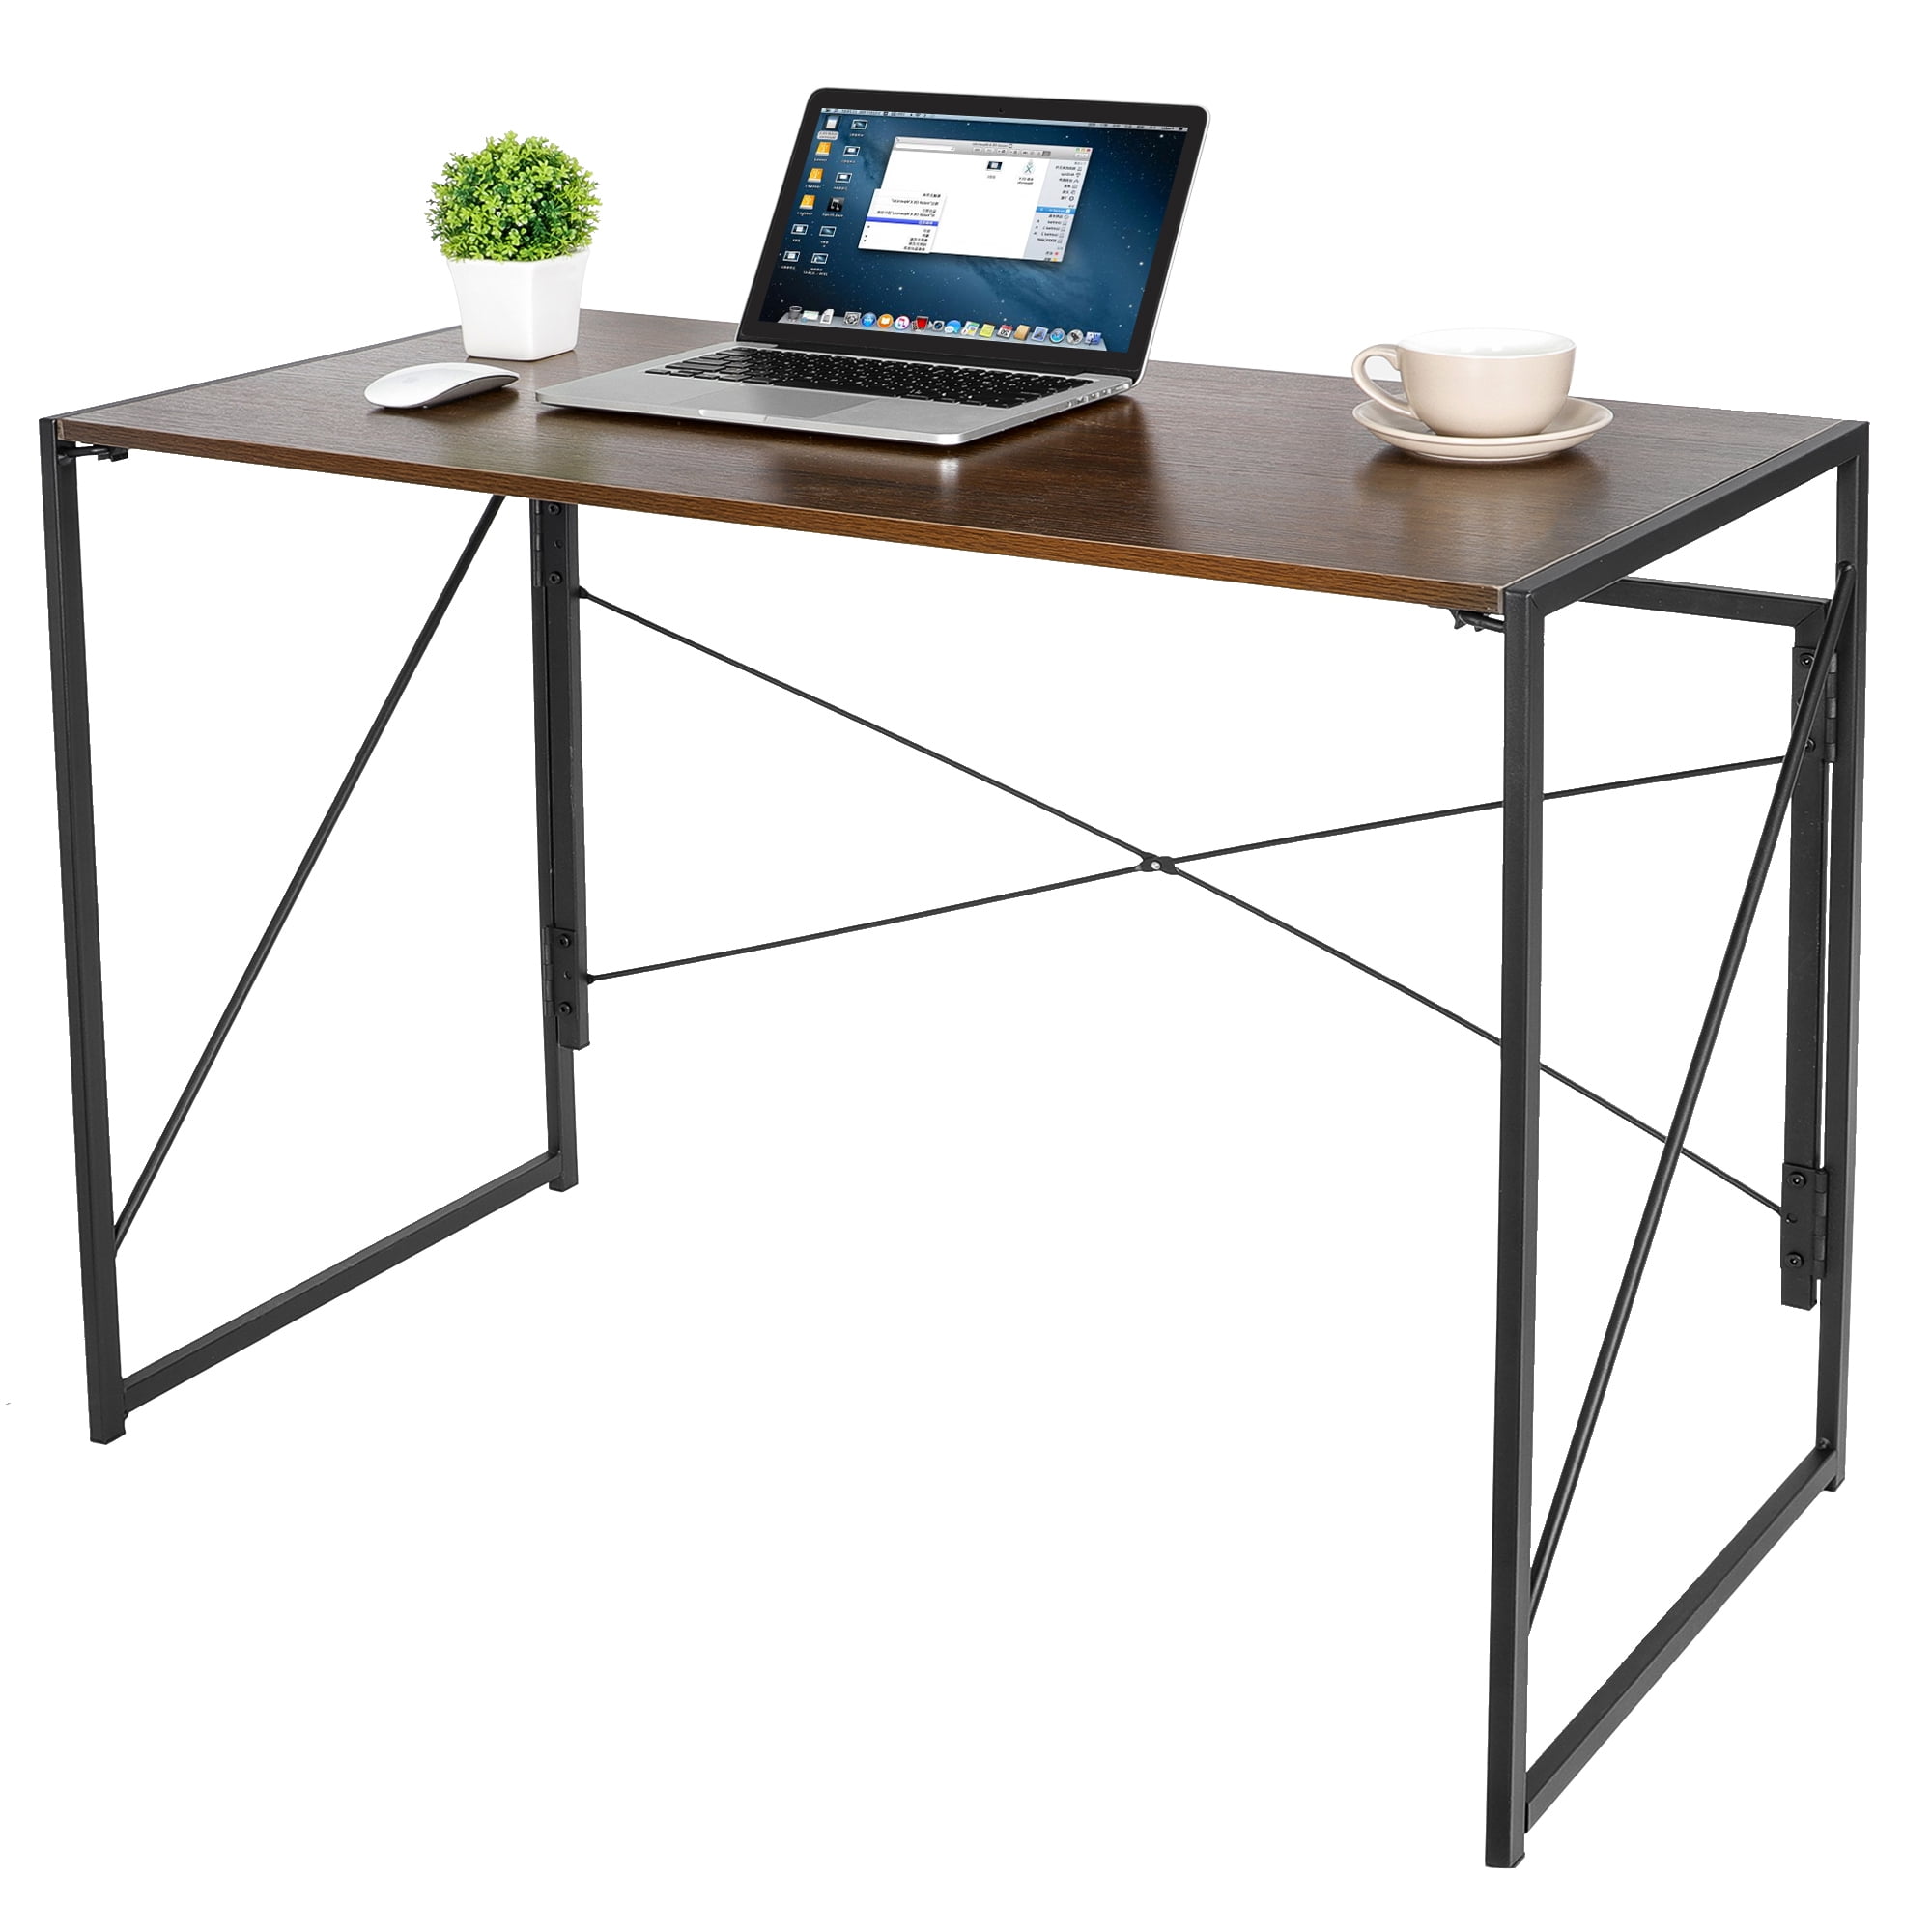 Household  Folded Computer Desk Bed Side PC Book Write Folding Rotation Table 